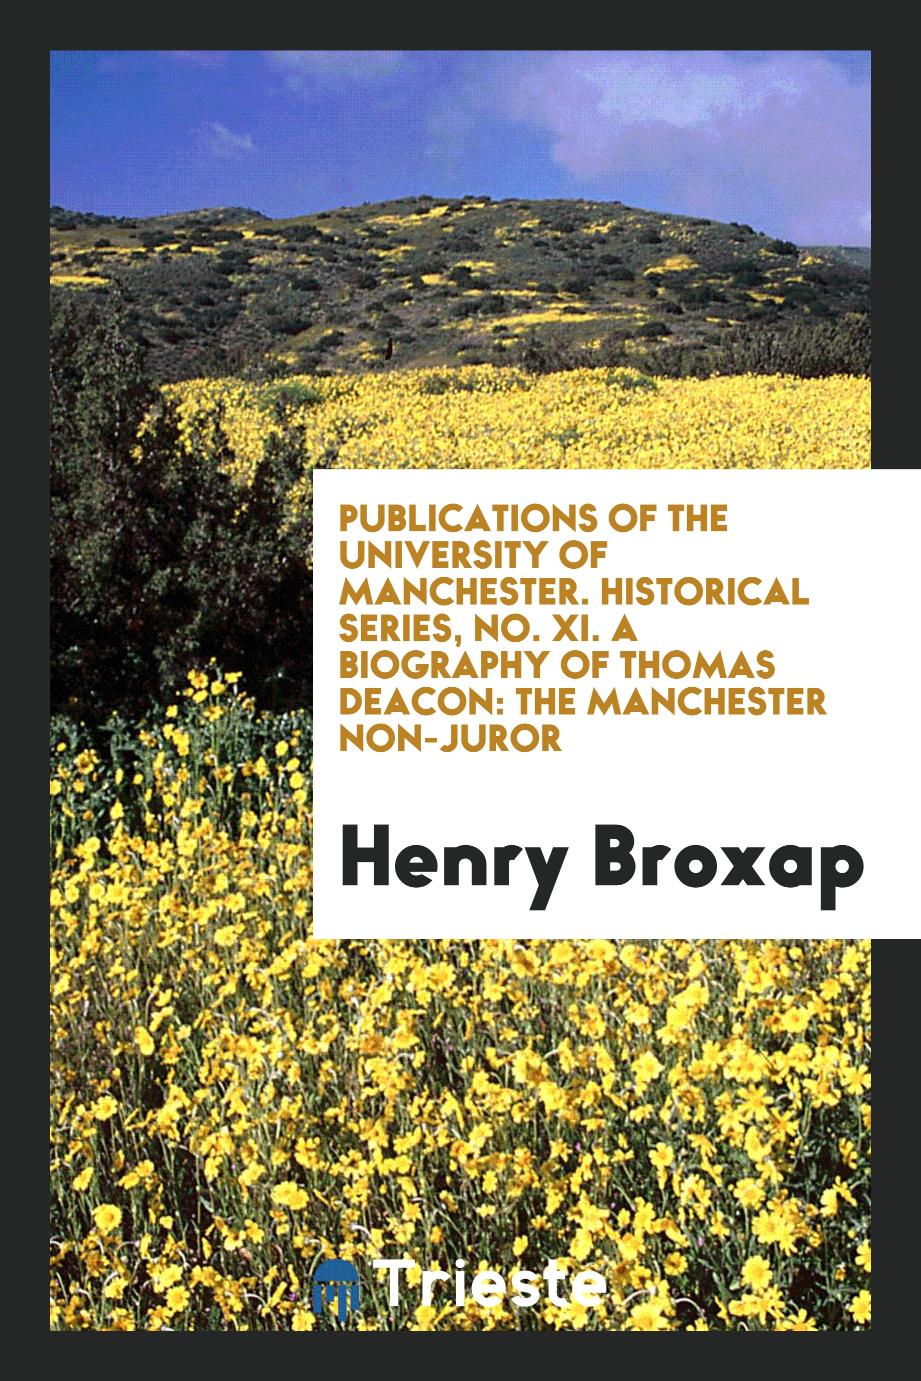 Publications of the University of Manchester. Historical Series, No. XI. A Biography of Thomas Deacon: The Manchester Non-Juror